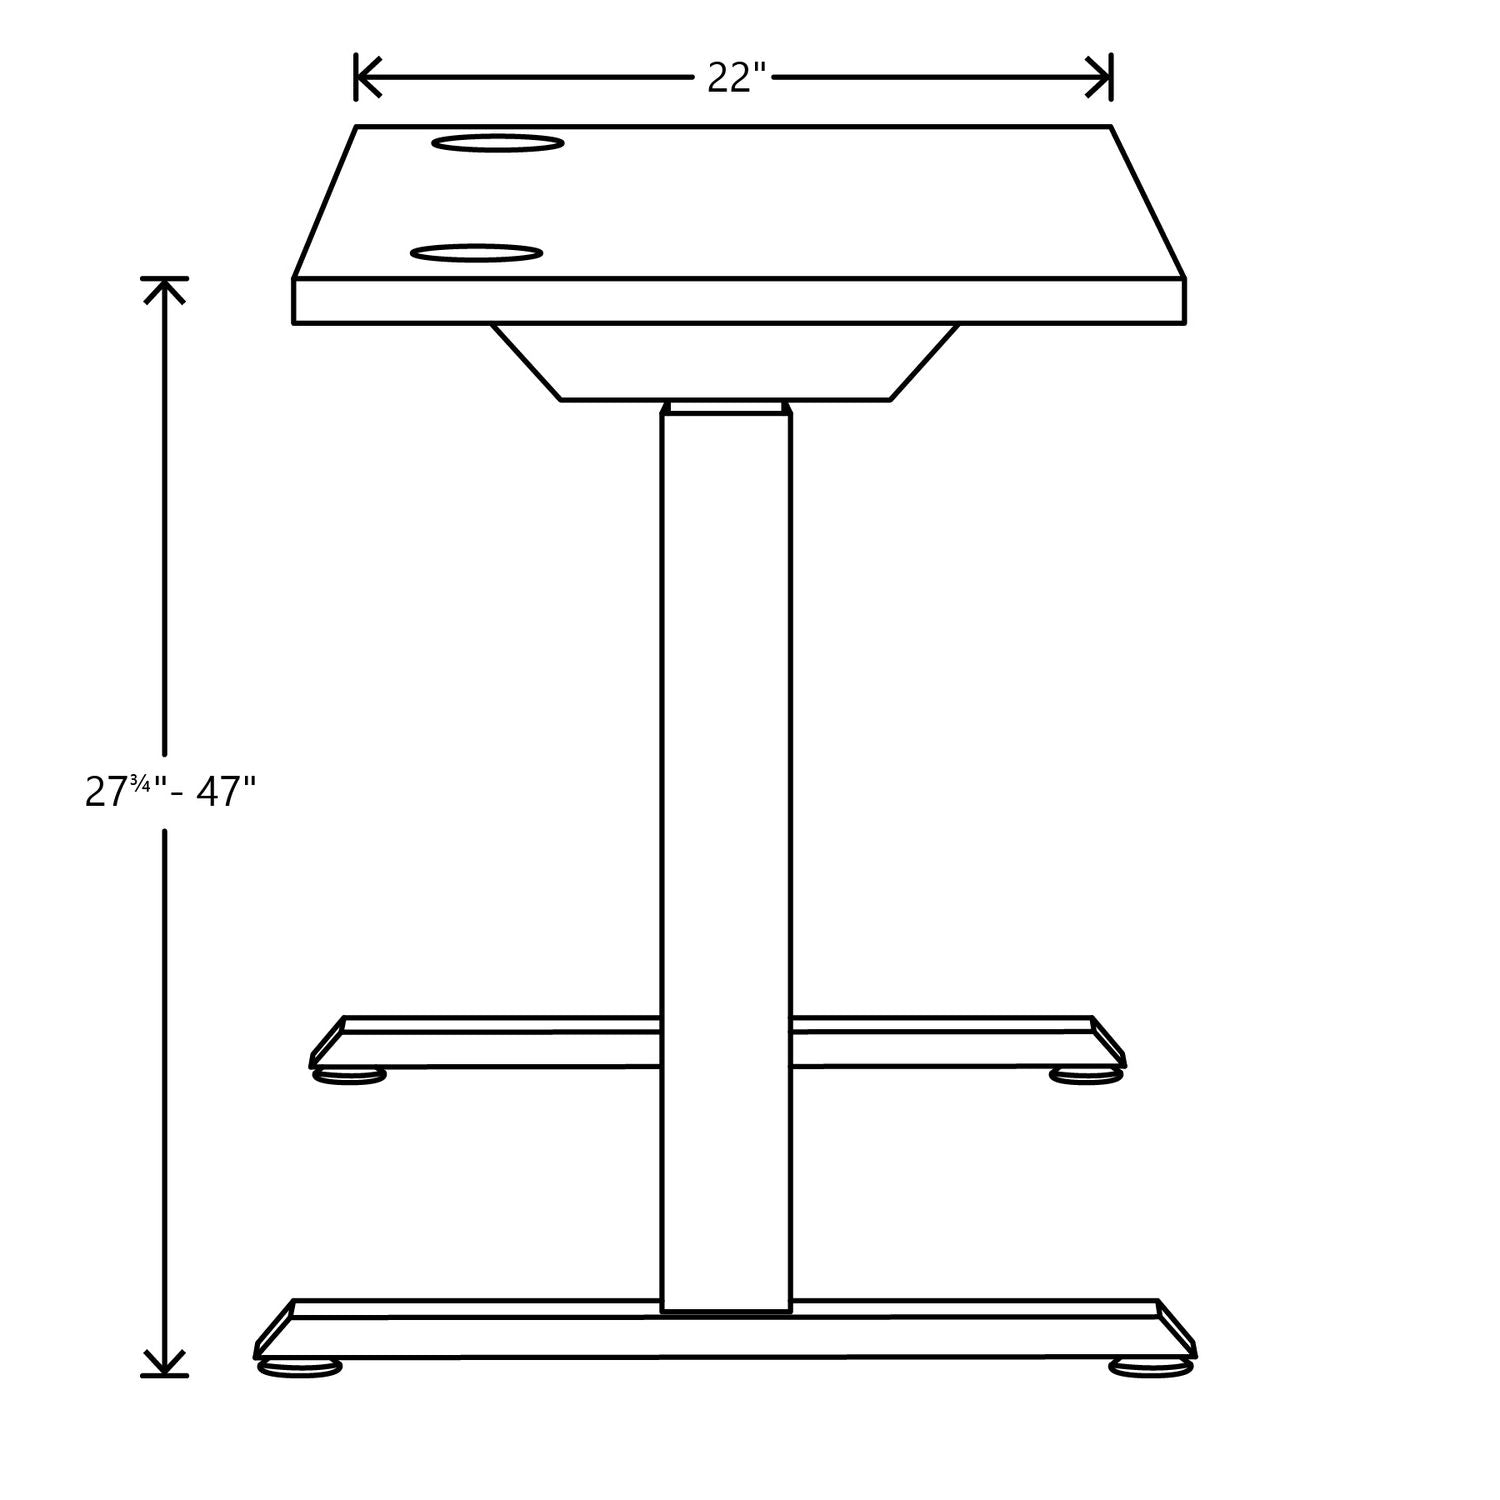 coordinate-height-adjustable-desk-bundle-2-stage-70-x-22-x-2775-to-47-pinnacle\\black-ships-in-7-10-business-days_honhat2spnb2270 - 7